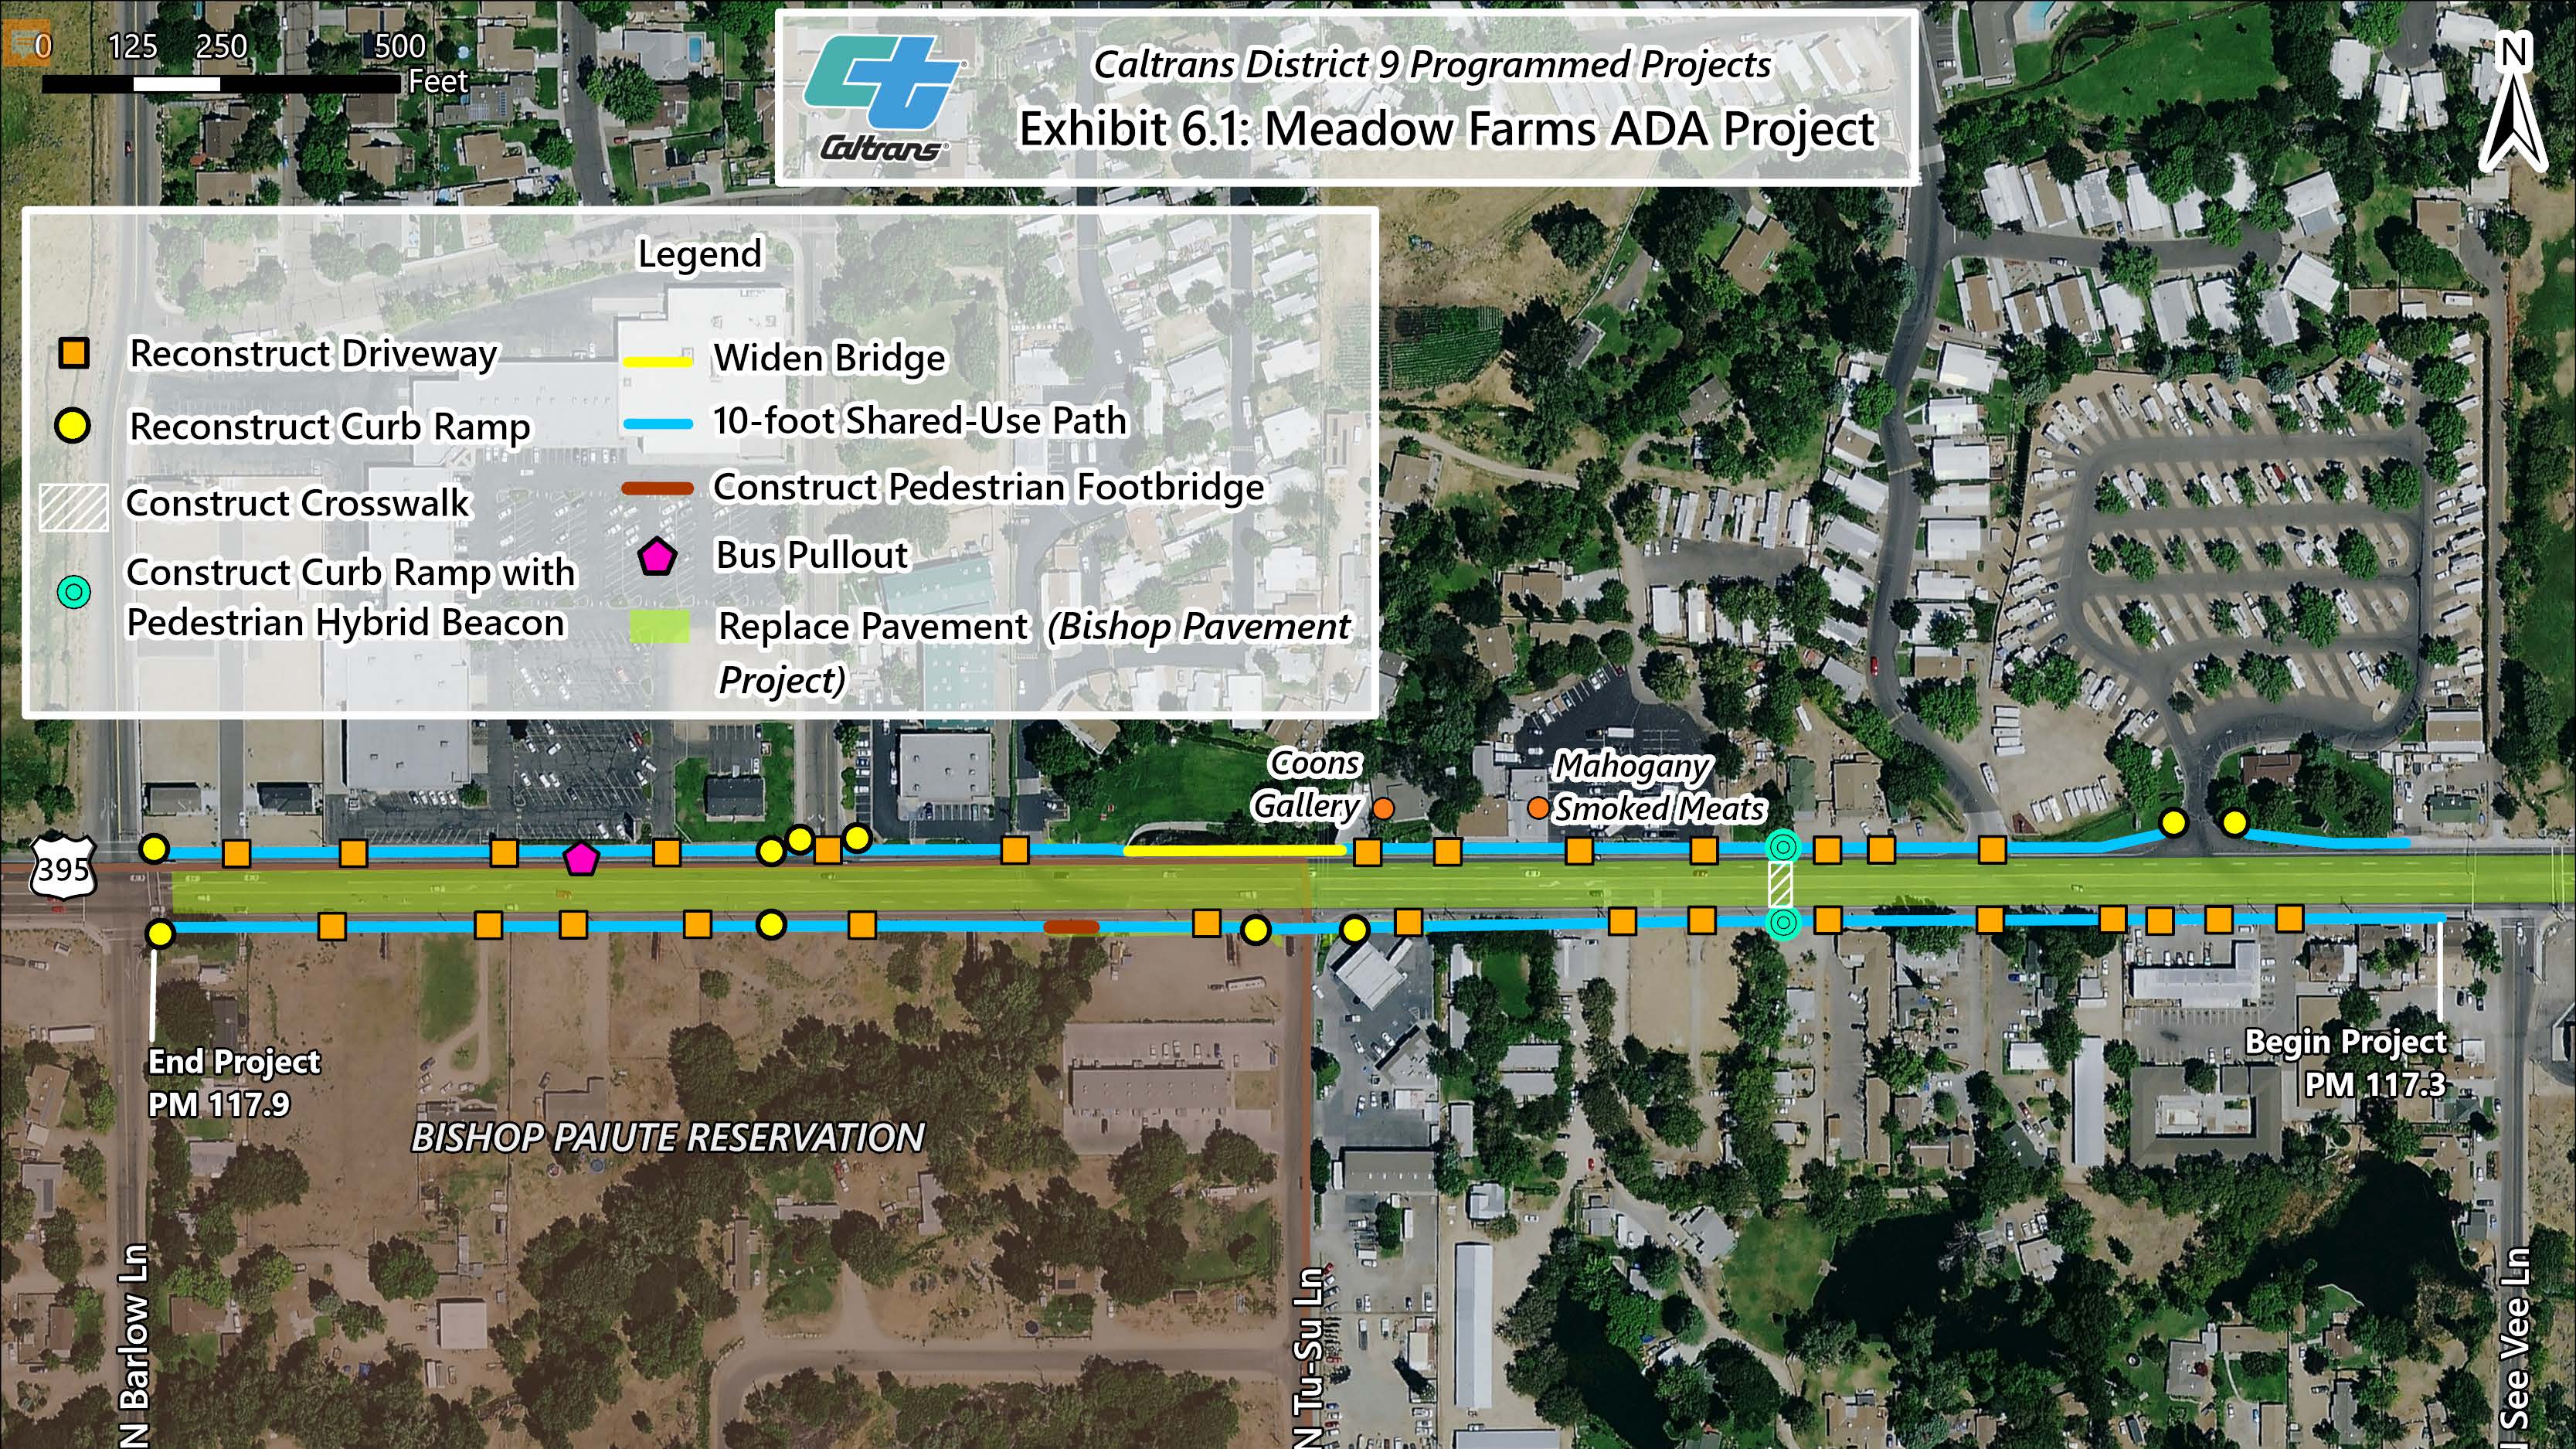 Map that shows where features will be placed during the Meadow Farms ADA Project.